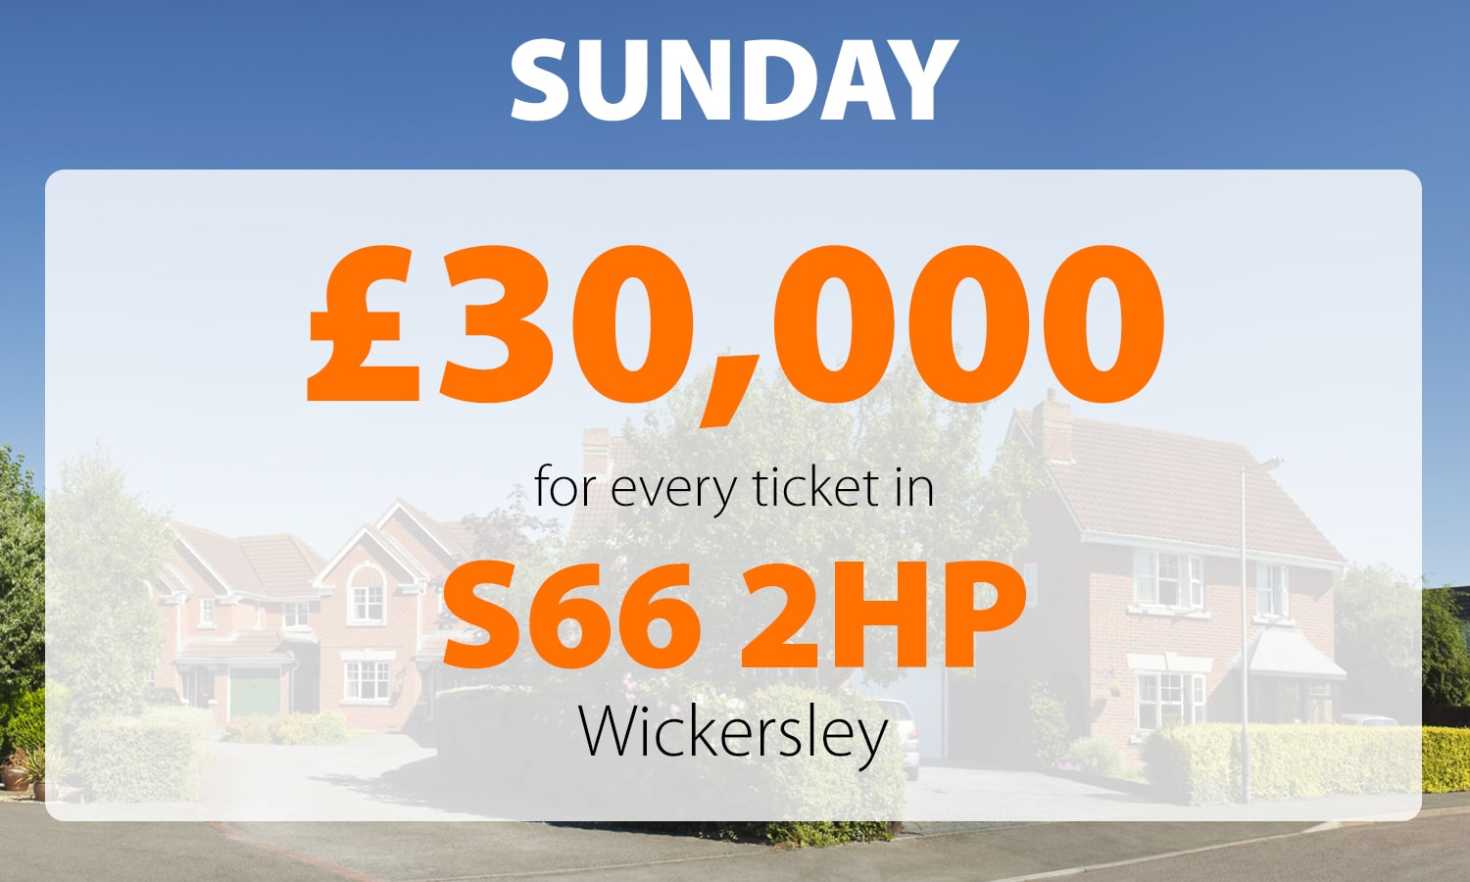 One lucky winner in Wickersley has landed a superb £30,000 in Sunday's Street Prize